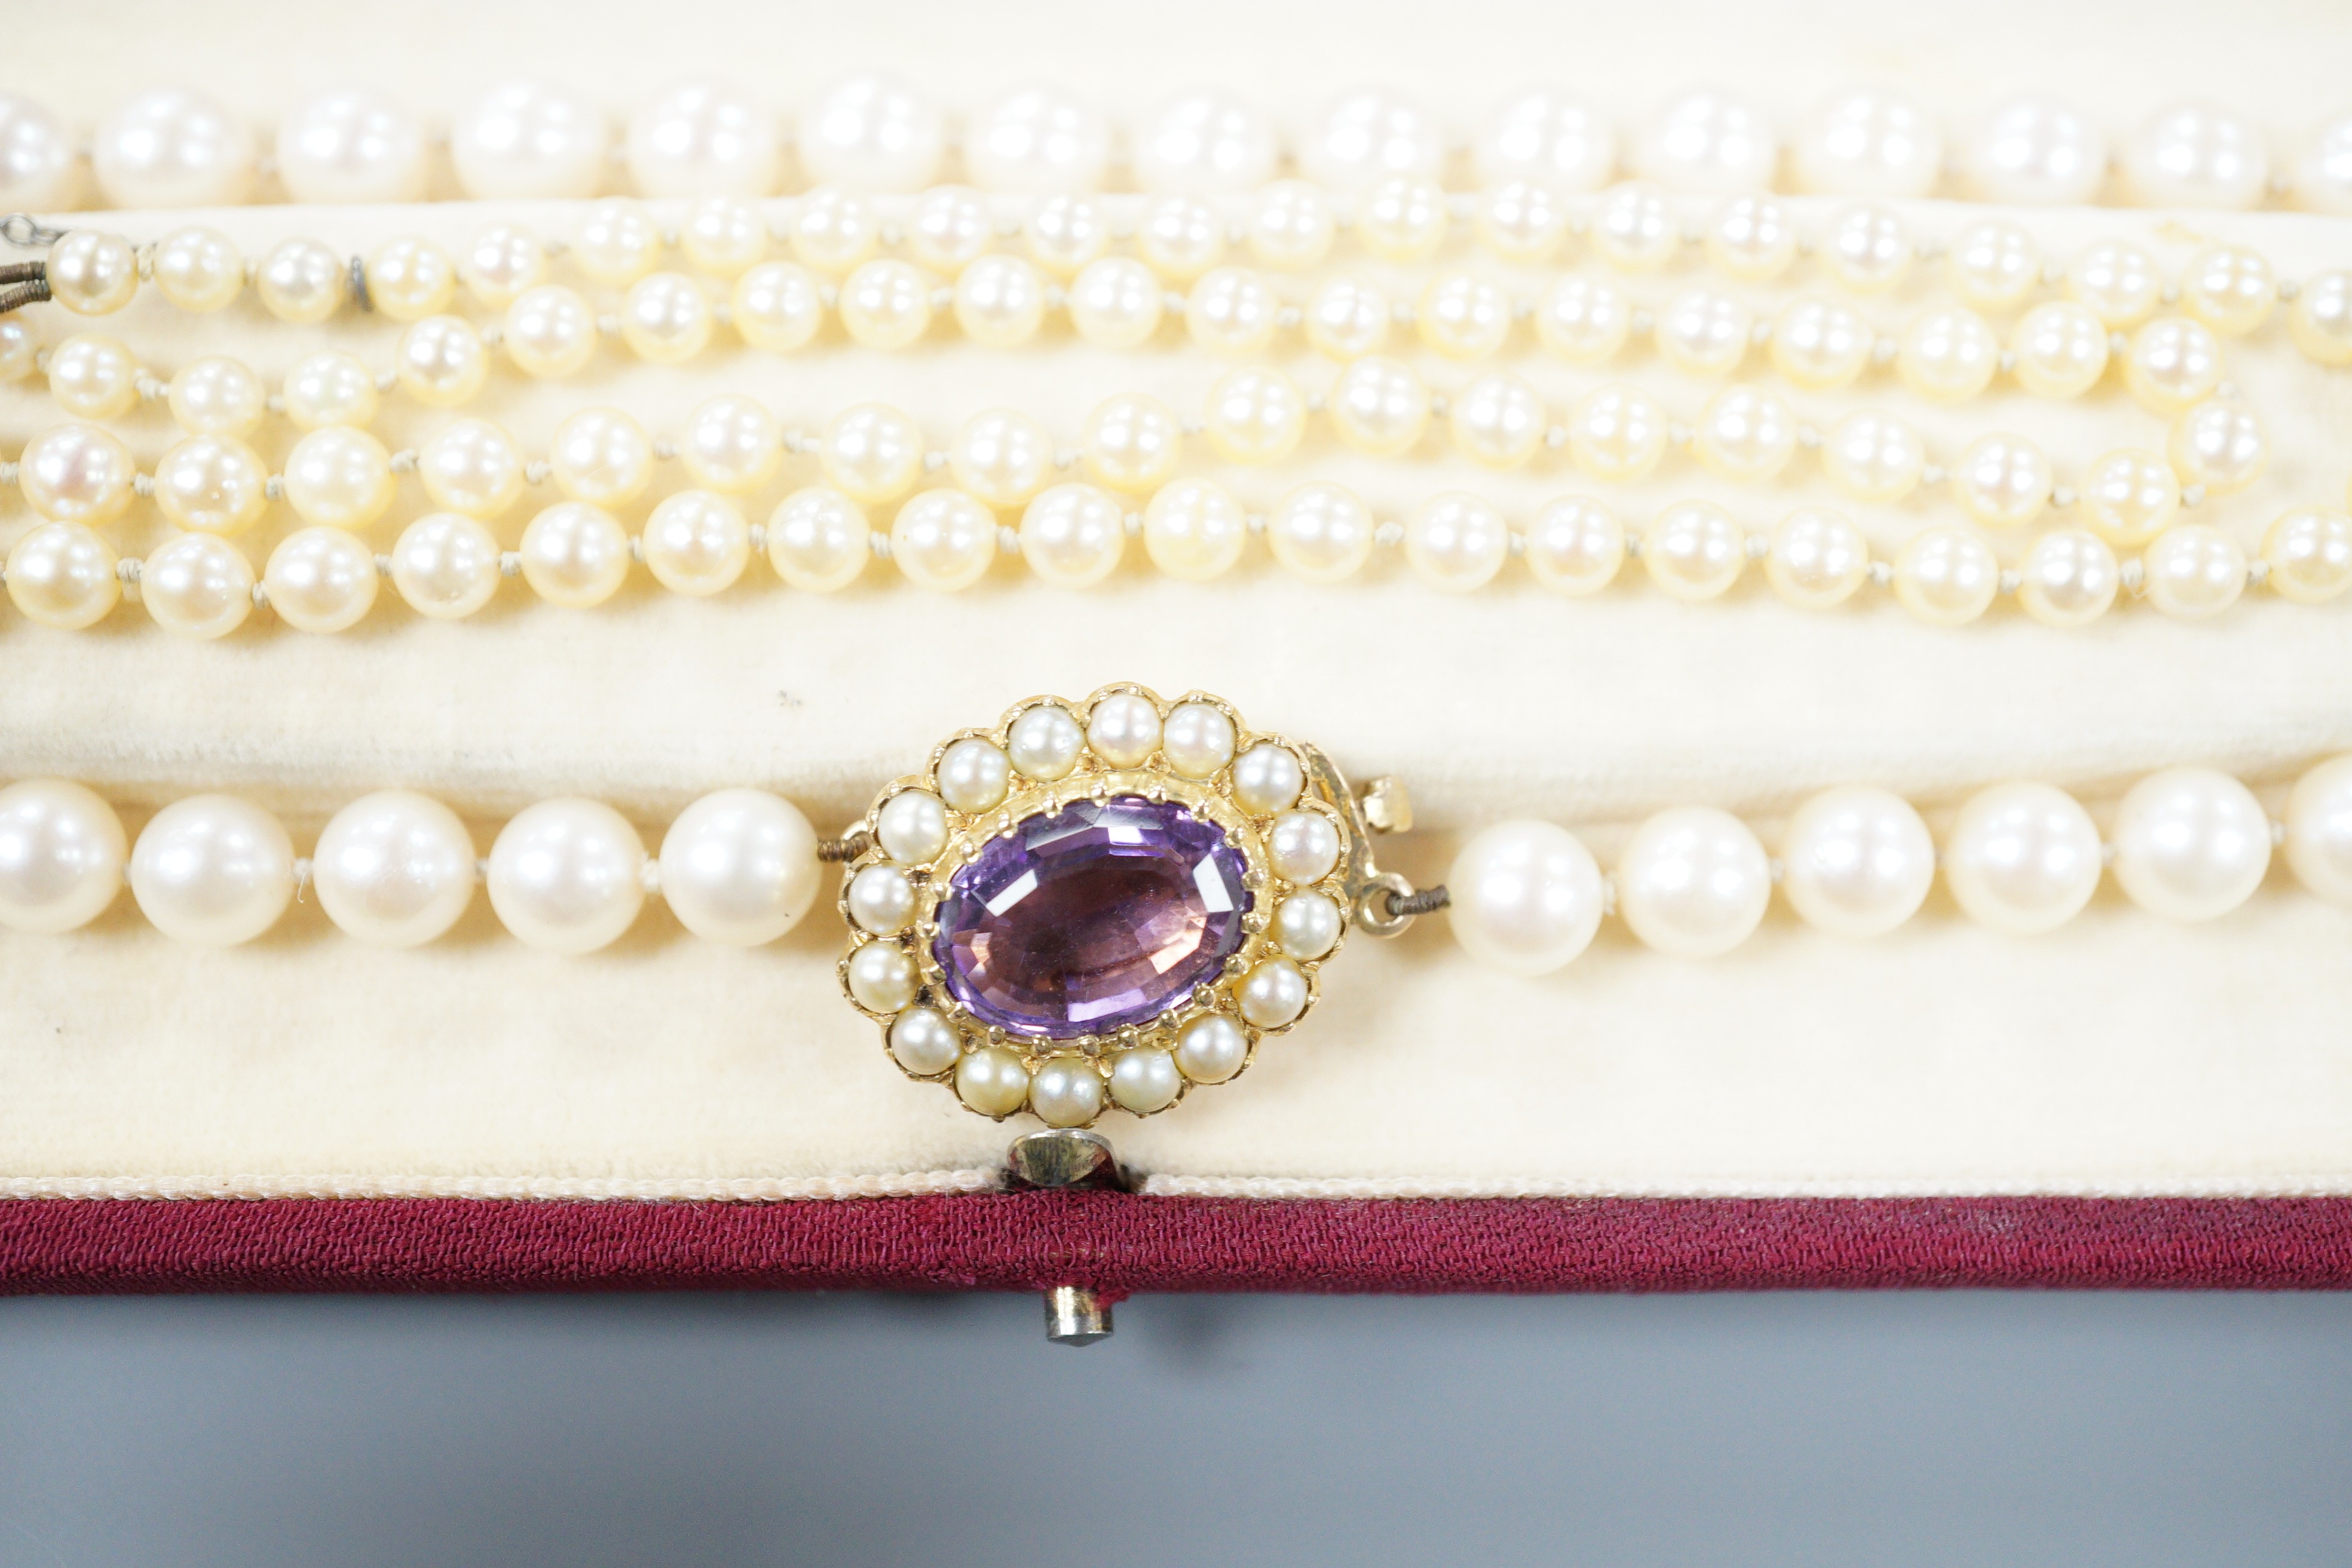 A modern single strand cultured pearl necklace, with 9ct, amethyst and cultured pearl set ova clasp, 44cm and one other single strand graduated cultured pearl necklace, with diamond chi set 9ct white gold clasp, 50cm.